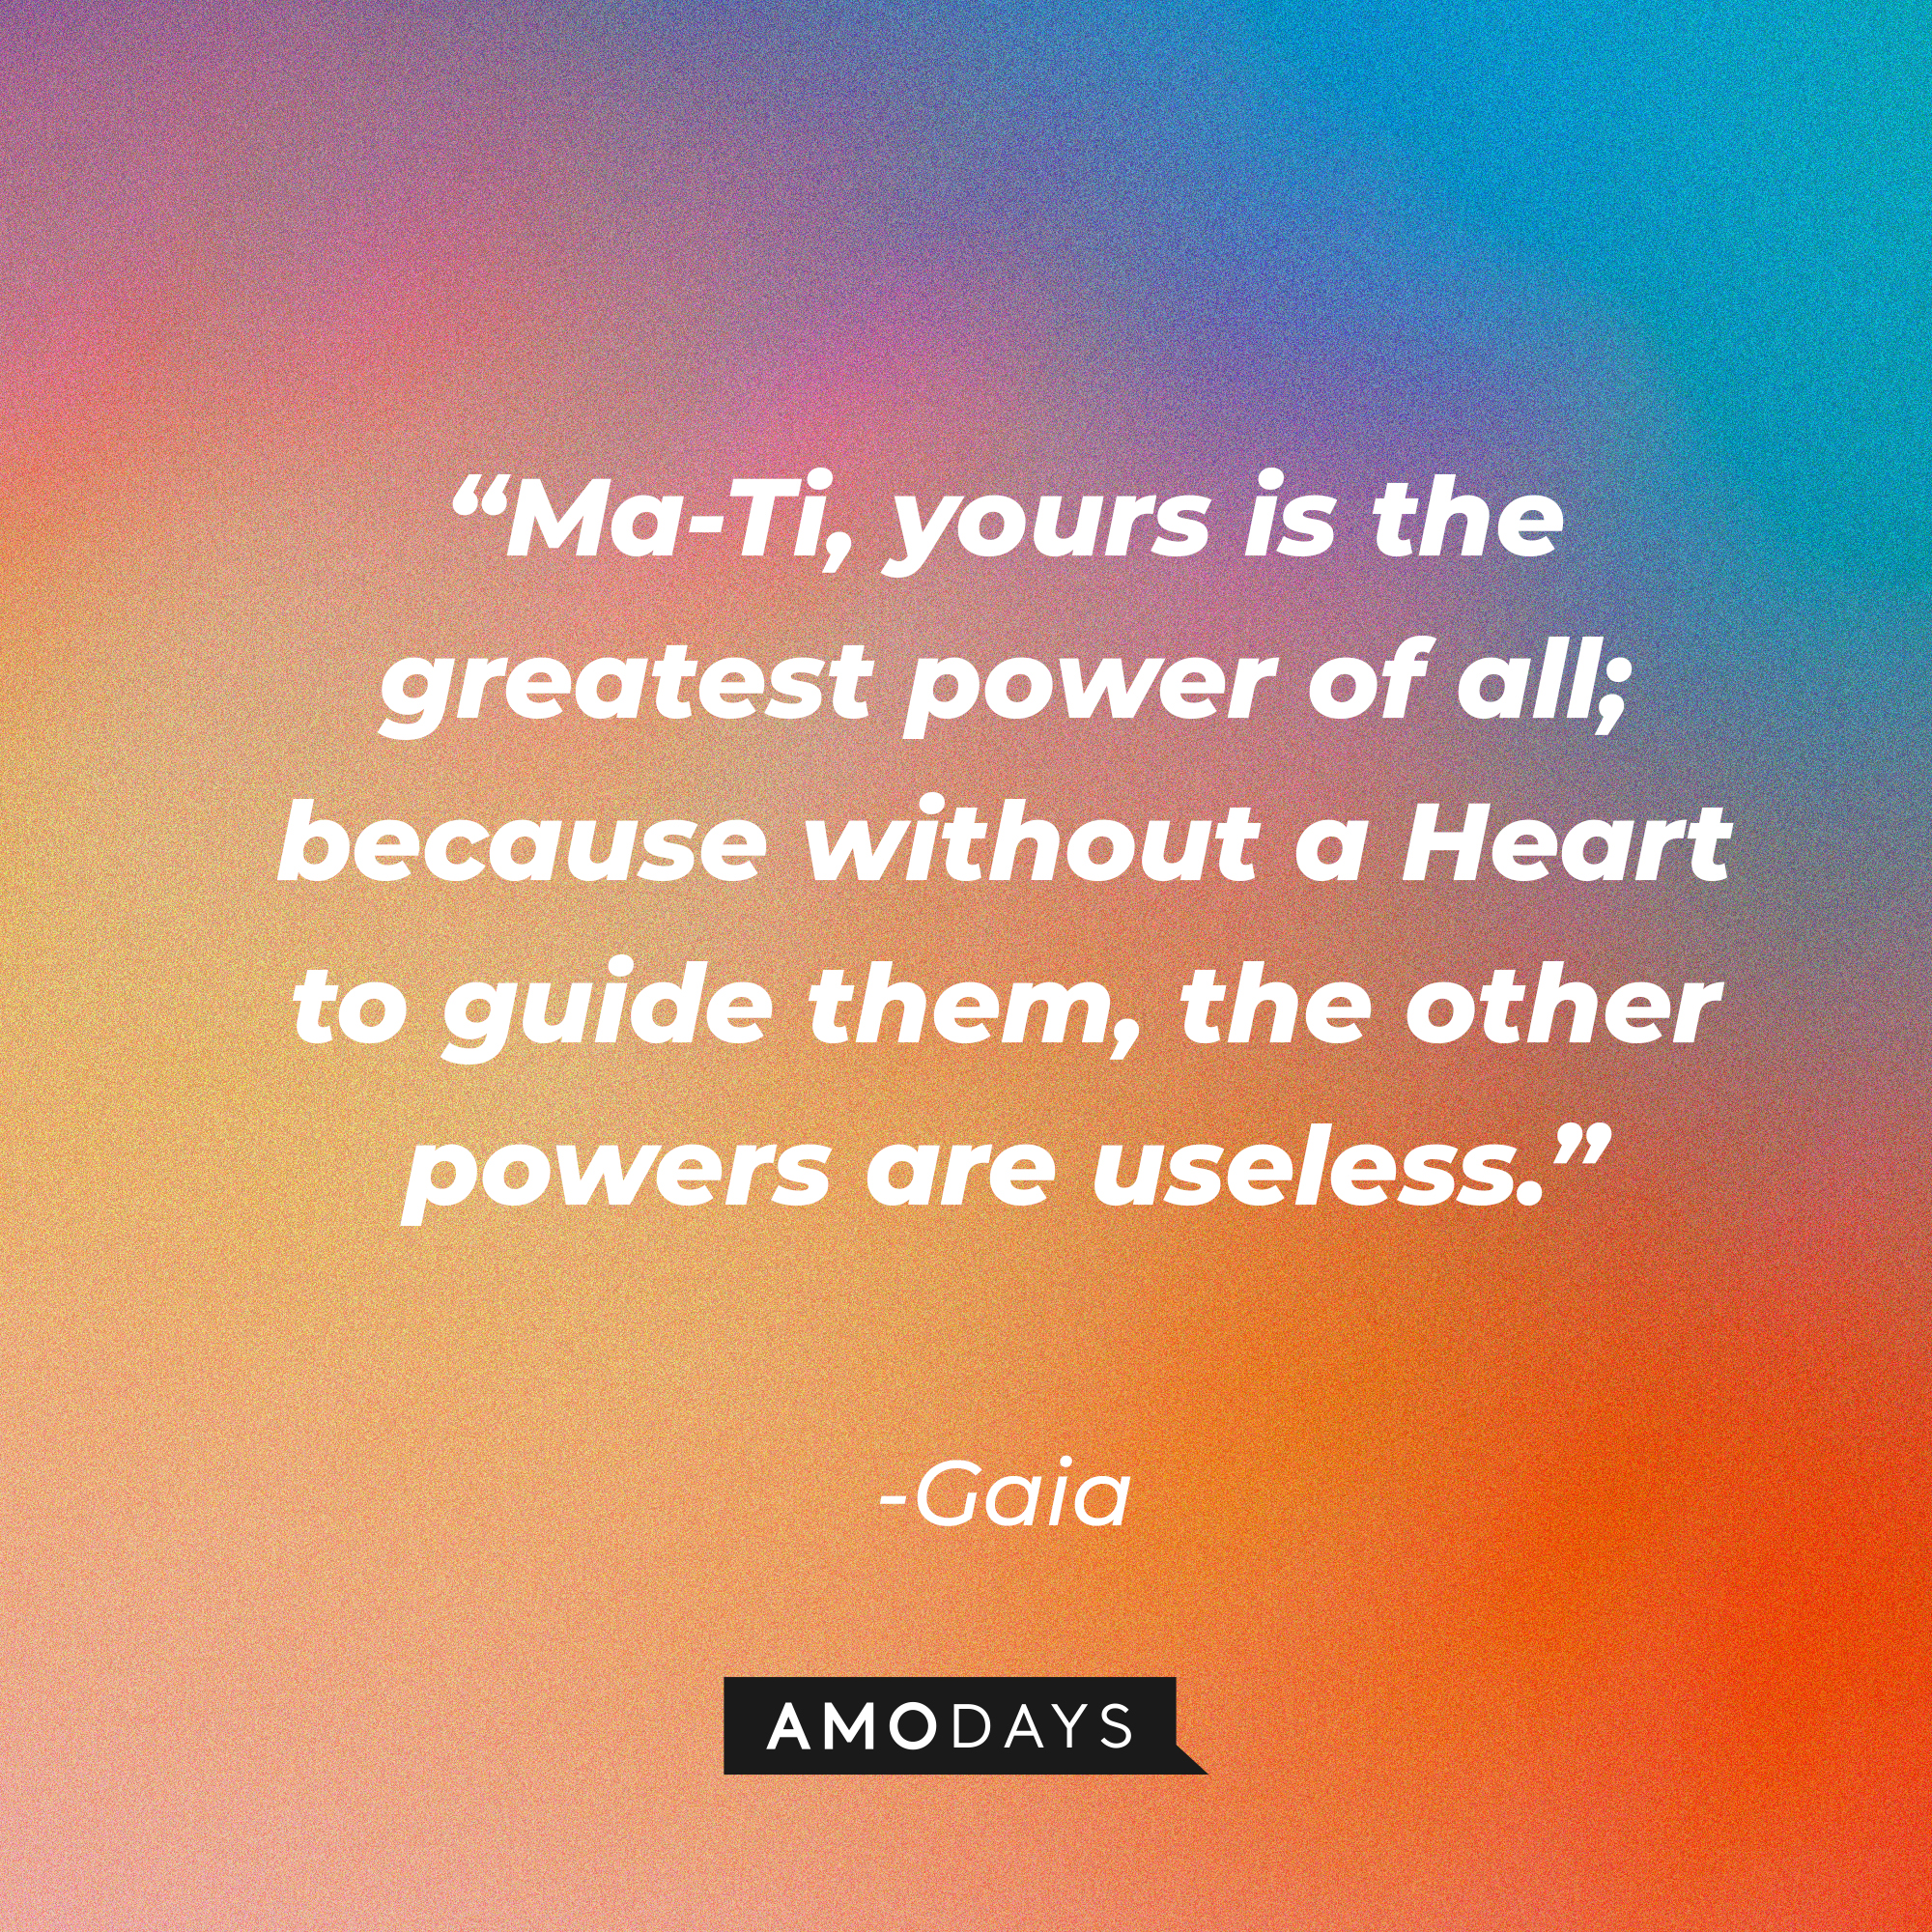 Gaia's quote: “Ma-Ti, yours is the greatest power of all; because without a Heart to guide them, the other powers are useless.” | Source: Amodays